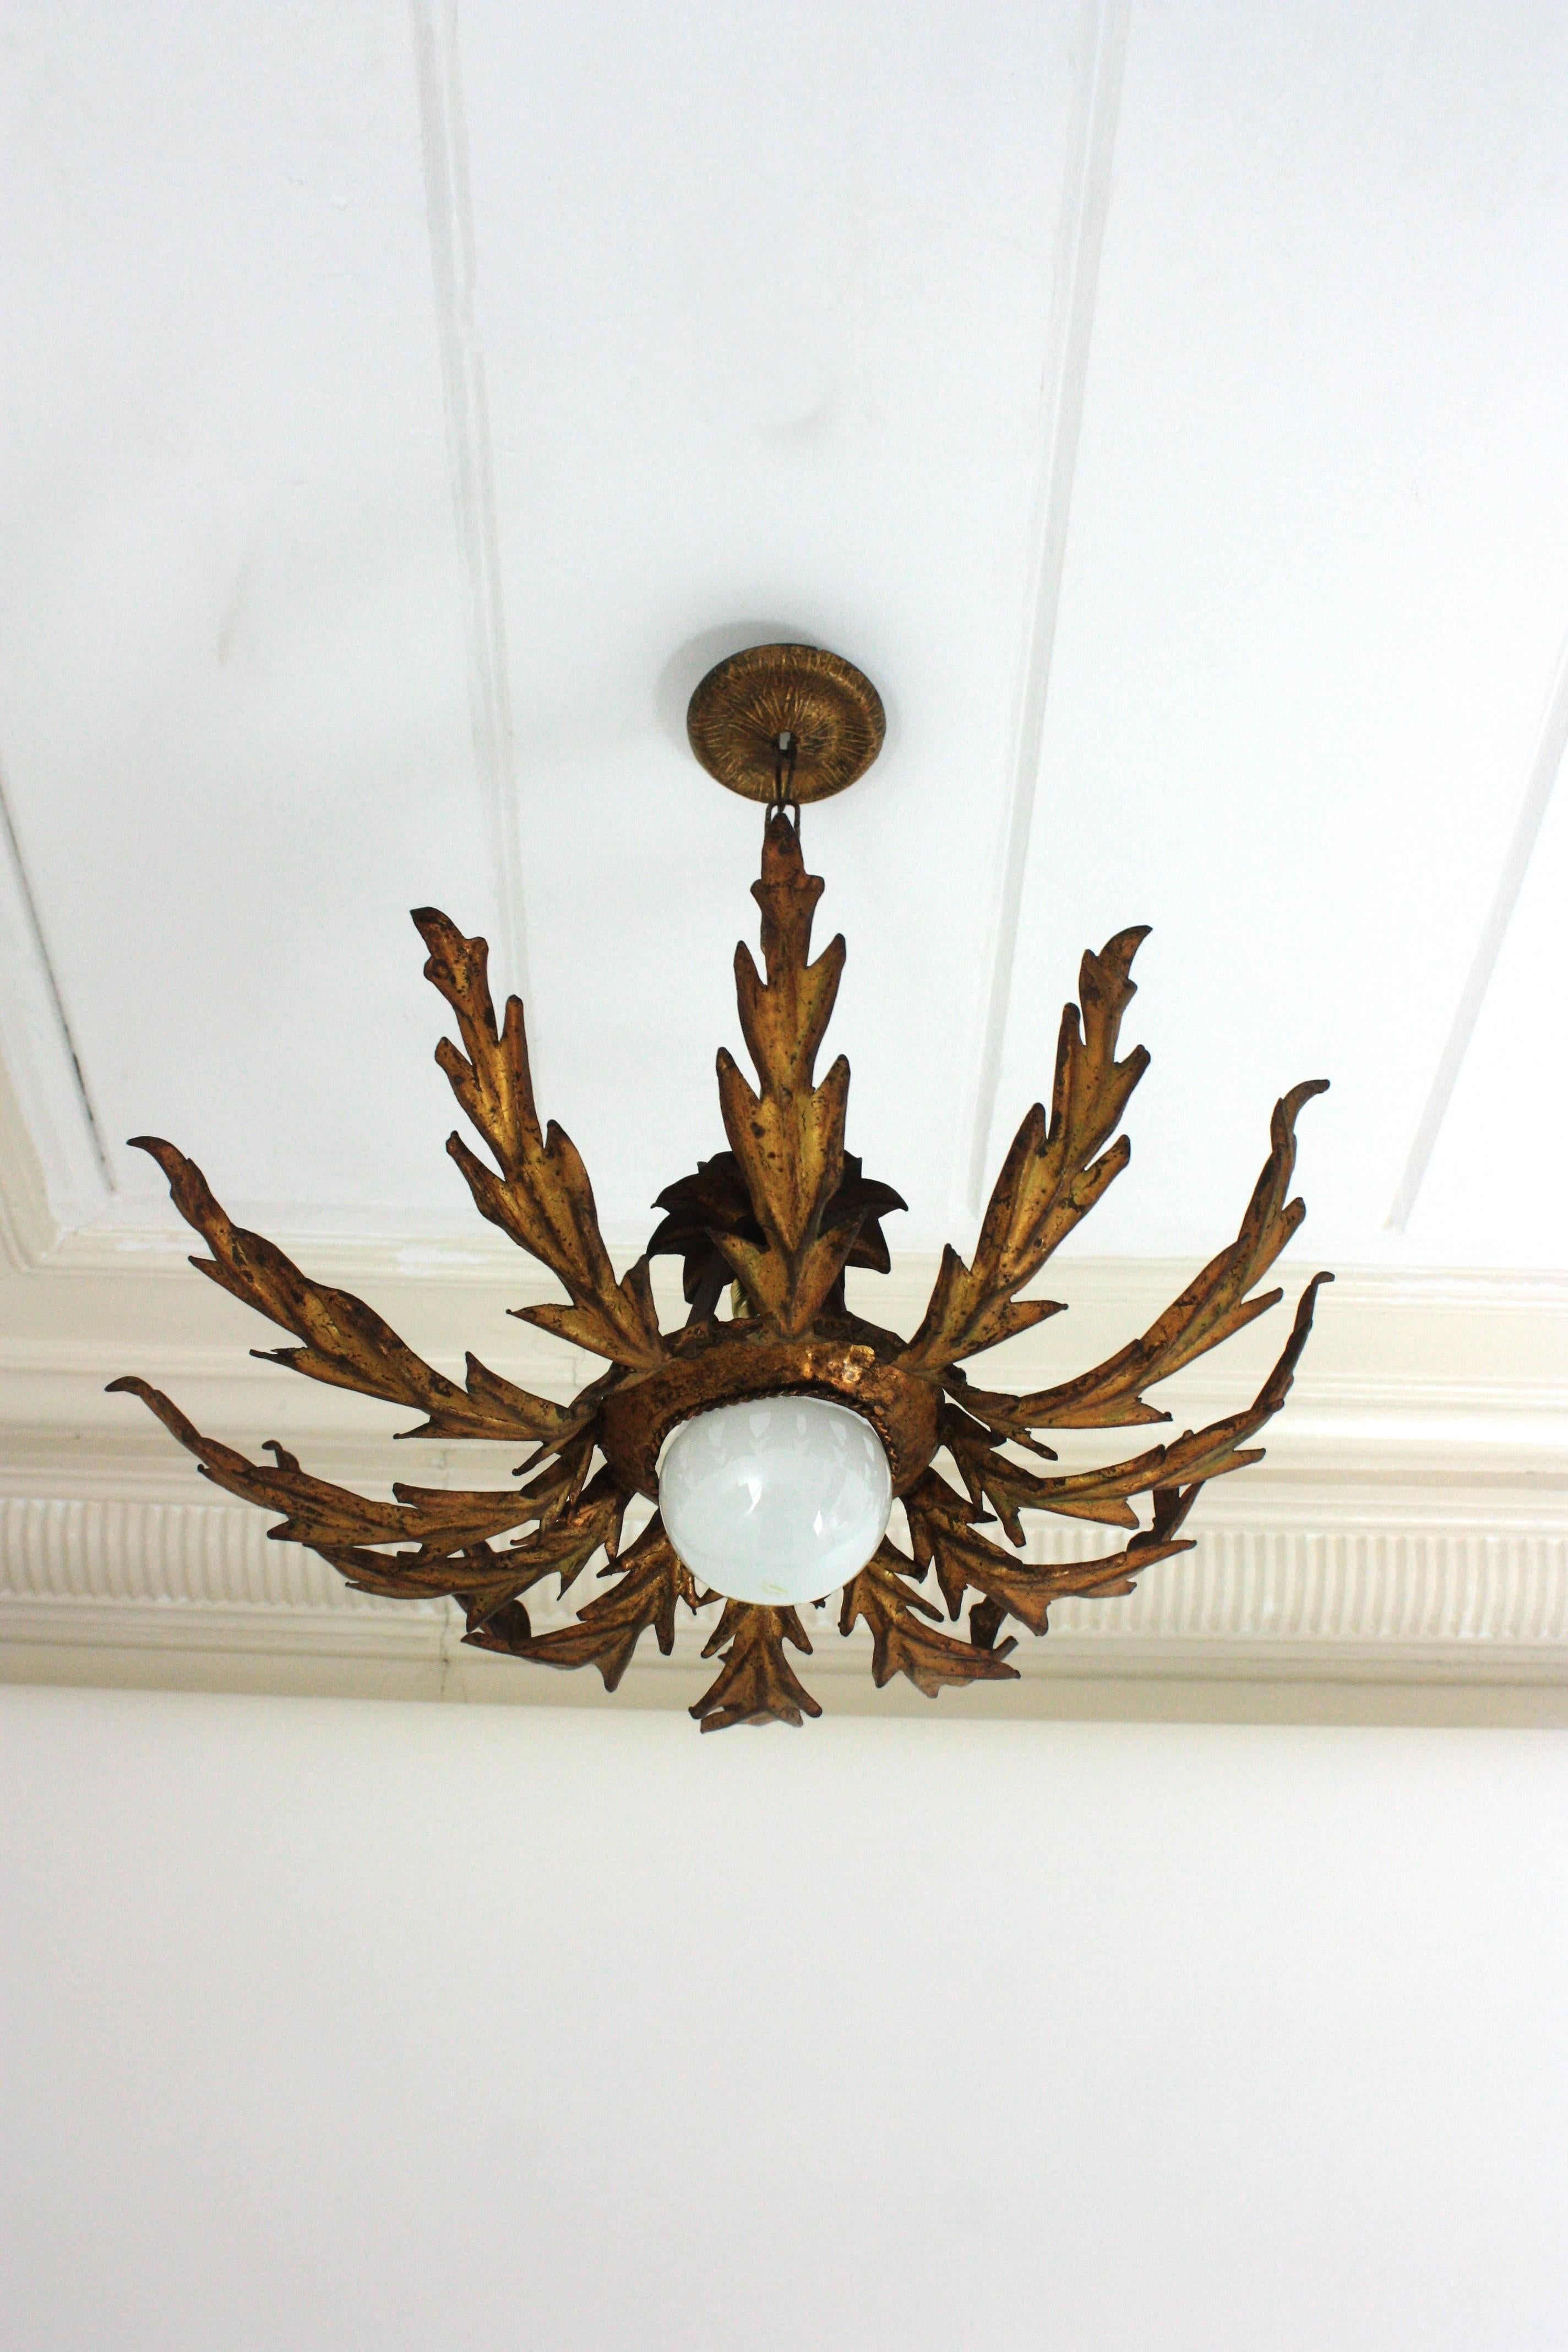 Metal French Sunburst Leafed Ceiling Light Fixture in Gilt Iron, 1940s For Sale